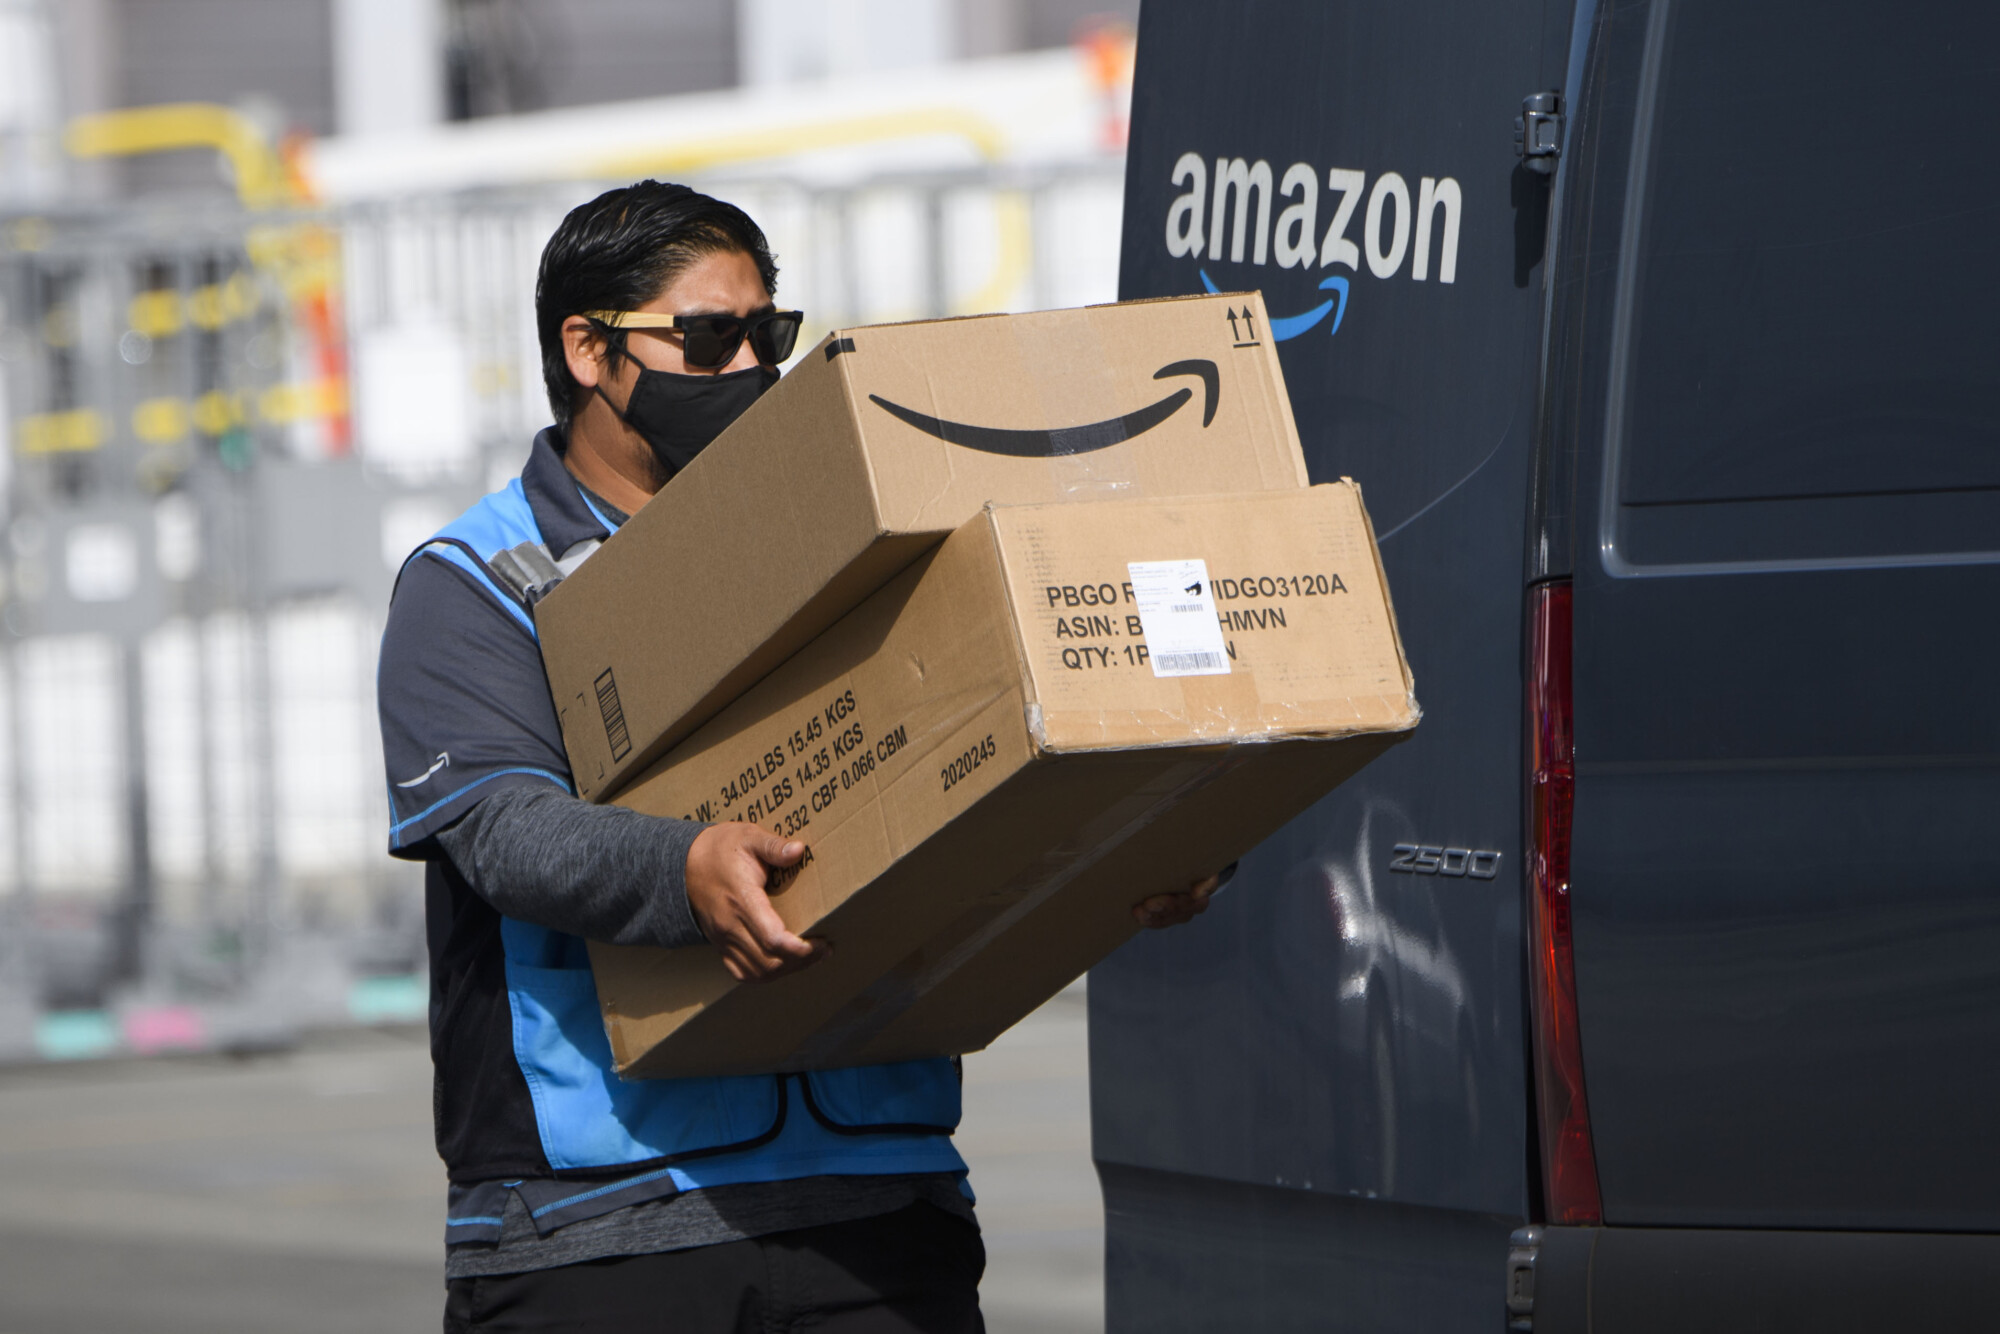 Amazon to Pay Customers Up to $1,000 in Compensation for Unsafe Items Sold by Third-Party Sellers